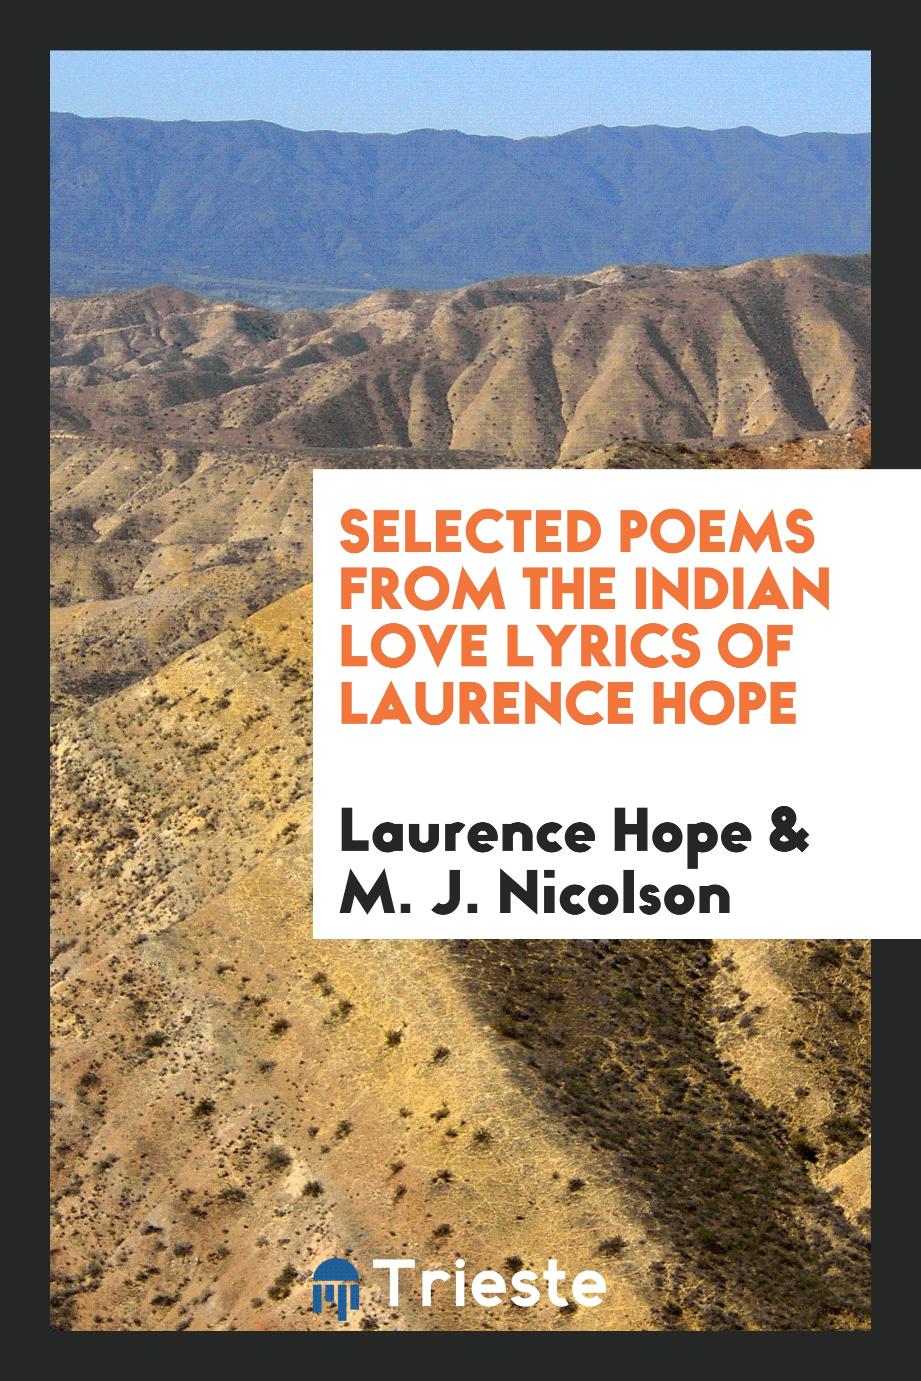 Selected poems from the Indian love lyrics of Laurence Hope